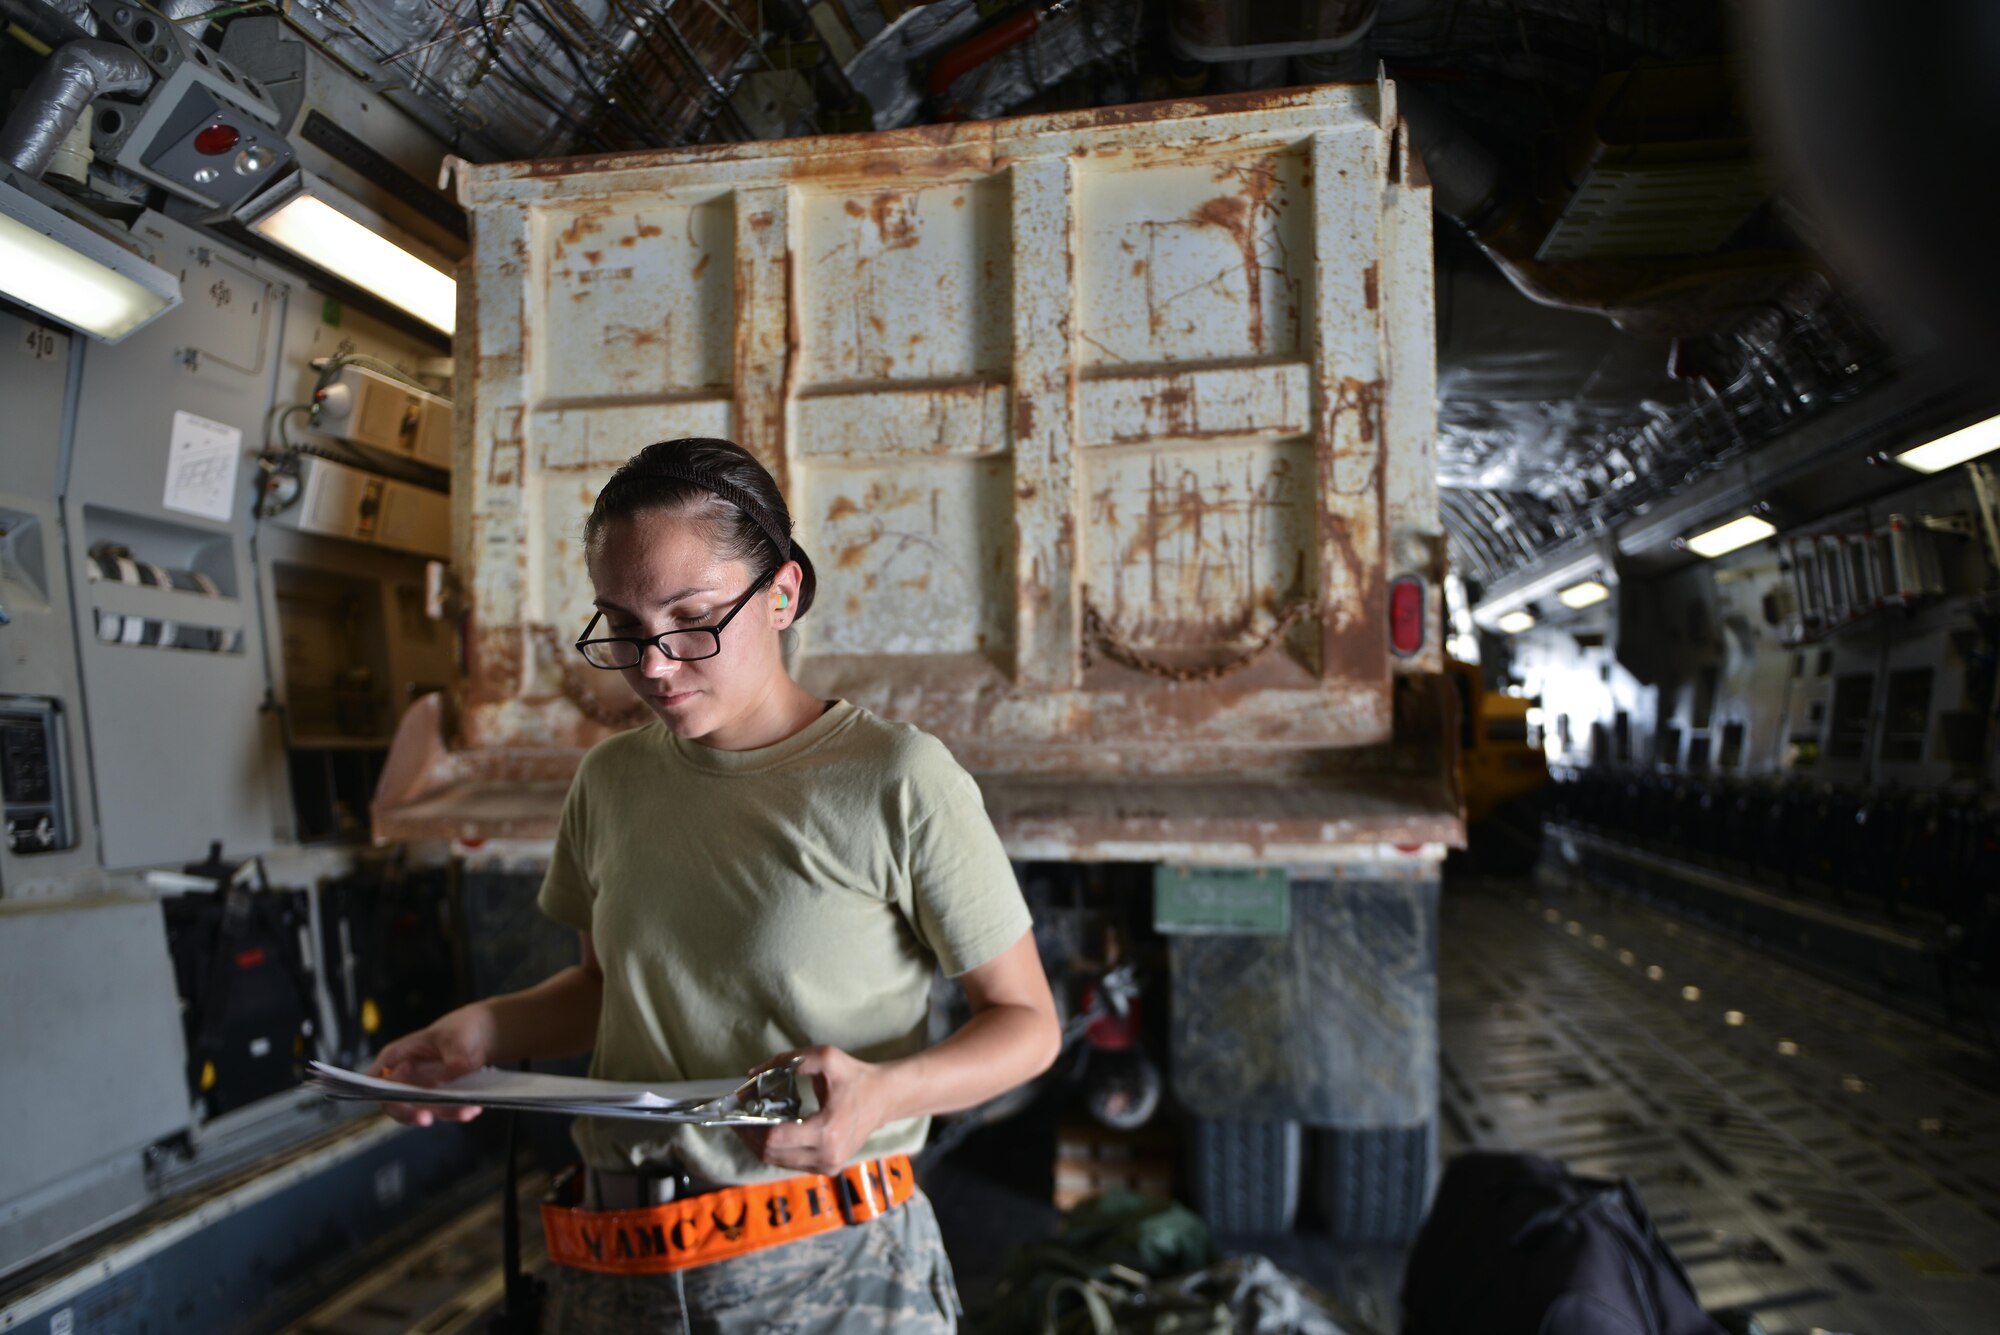 Airman 1st Class Kimberly Wolfgang, 8th Expeditionary Air Mobility Squadron, reviews a equipment manifest to configure weight distribution on a C-17 Globemaster aircraft May 13, 2015 at Al Udeid Air Base, Qatar. Airmen from separate squadrons deployed to Al Udeid helped support a mission for forward deployed members of RED HORSE Civil Engineering to repair a runway in Southwest Asia in support of Operation Inherent Resolve. (U.S. Air Force photo/Staff Sgt. Alexandre Montes)